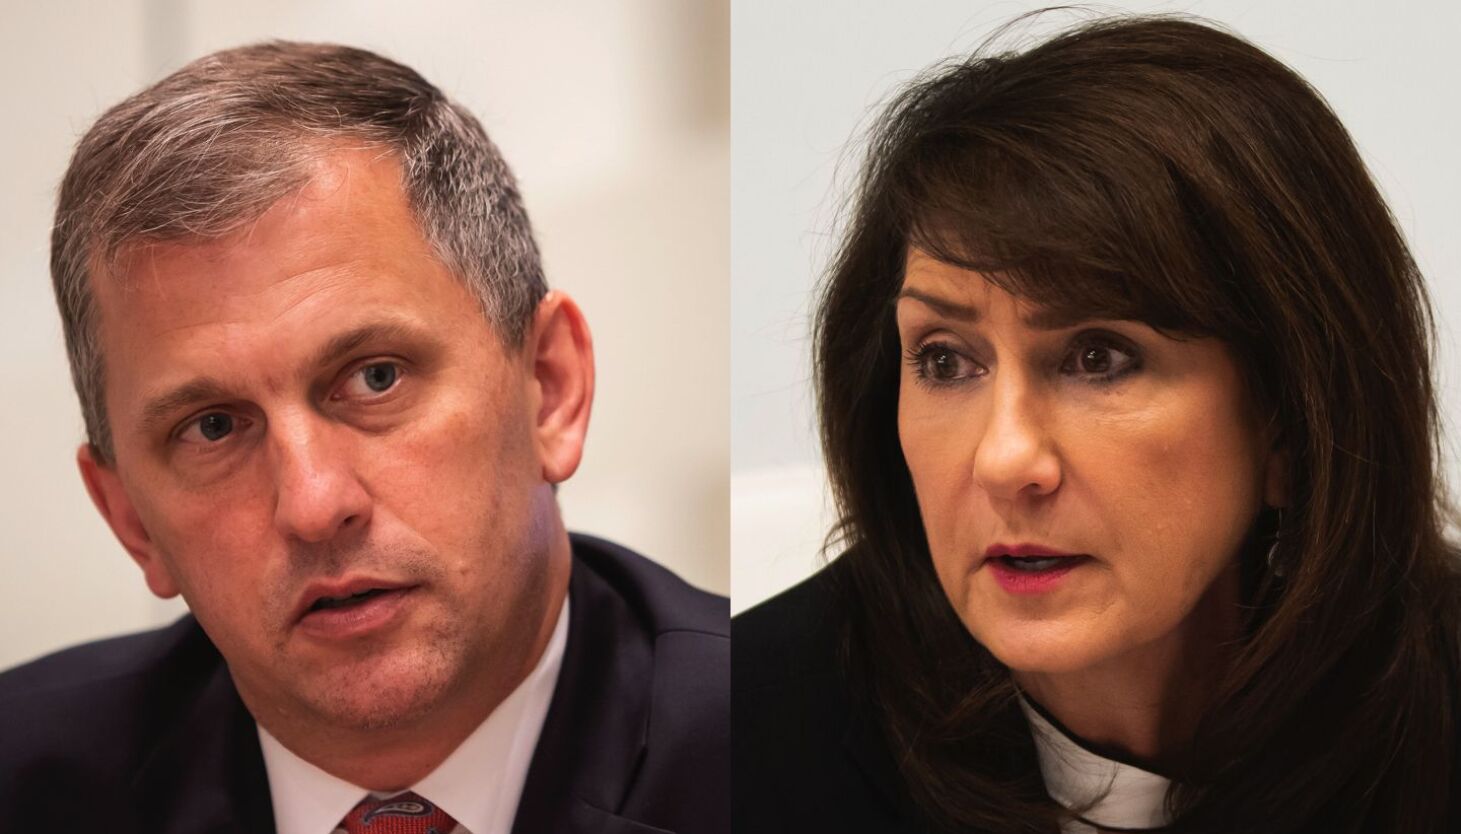  Rep. Casten calls on rival Rep. Newman to disclose secret settlement at heart of House ethics probe 